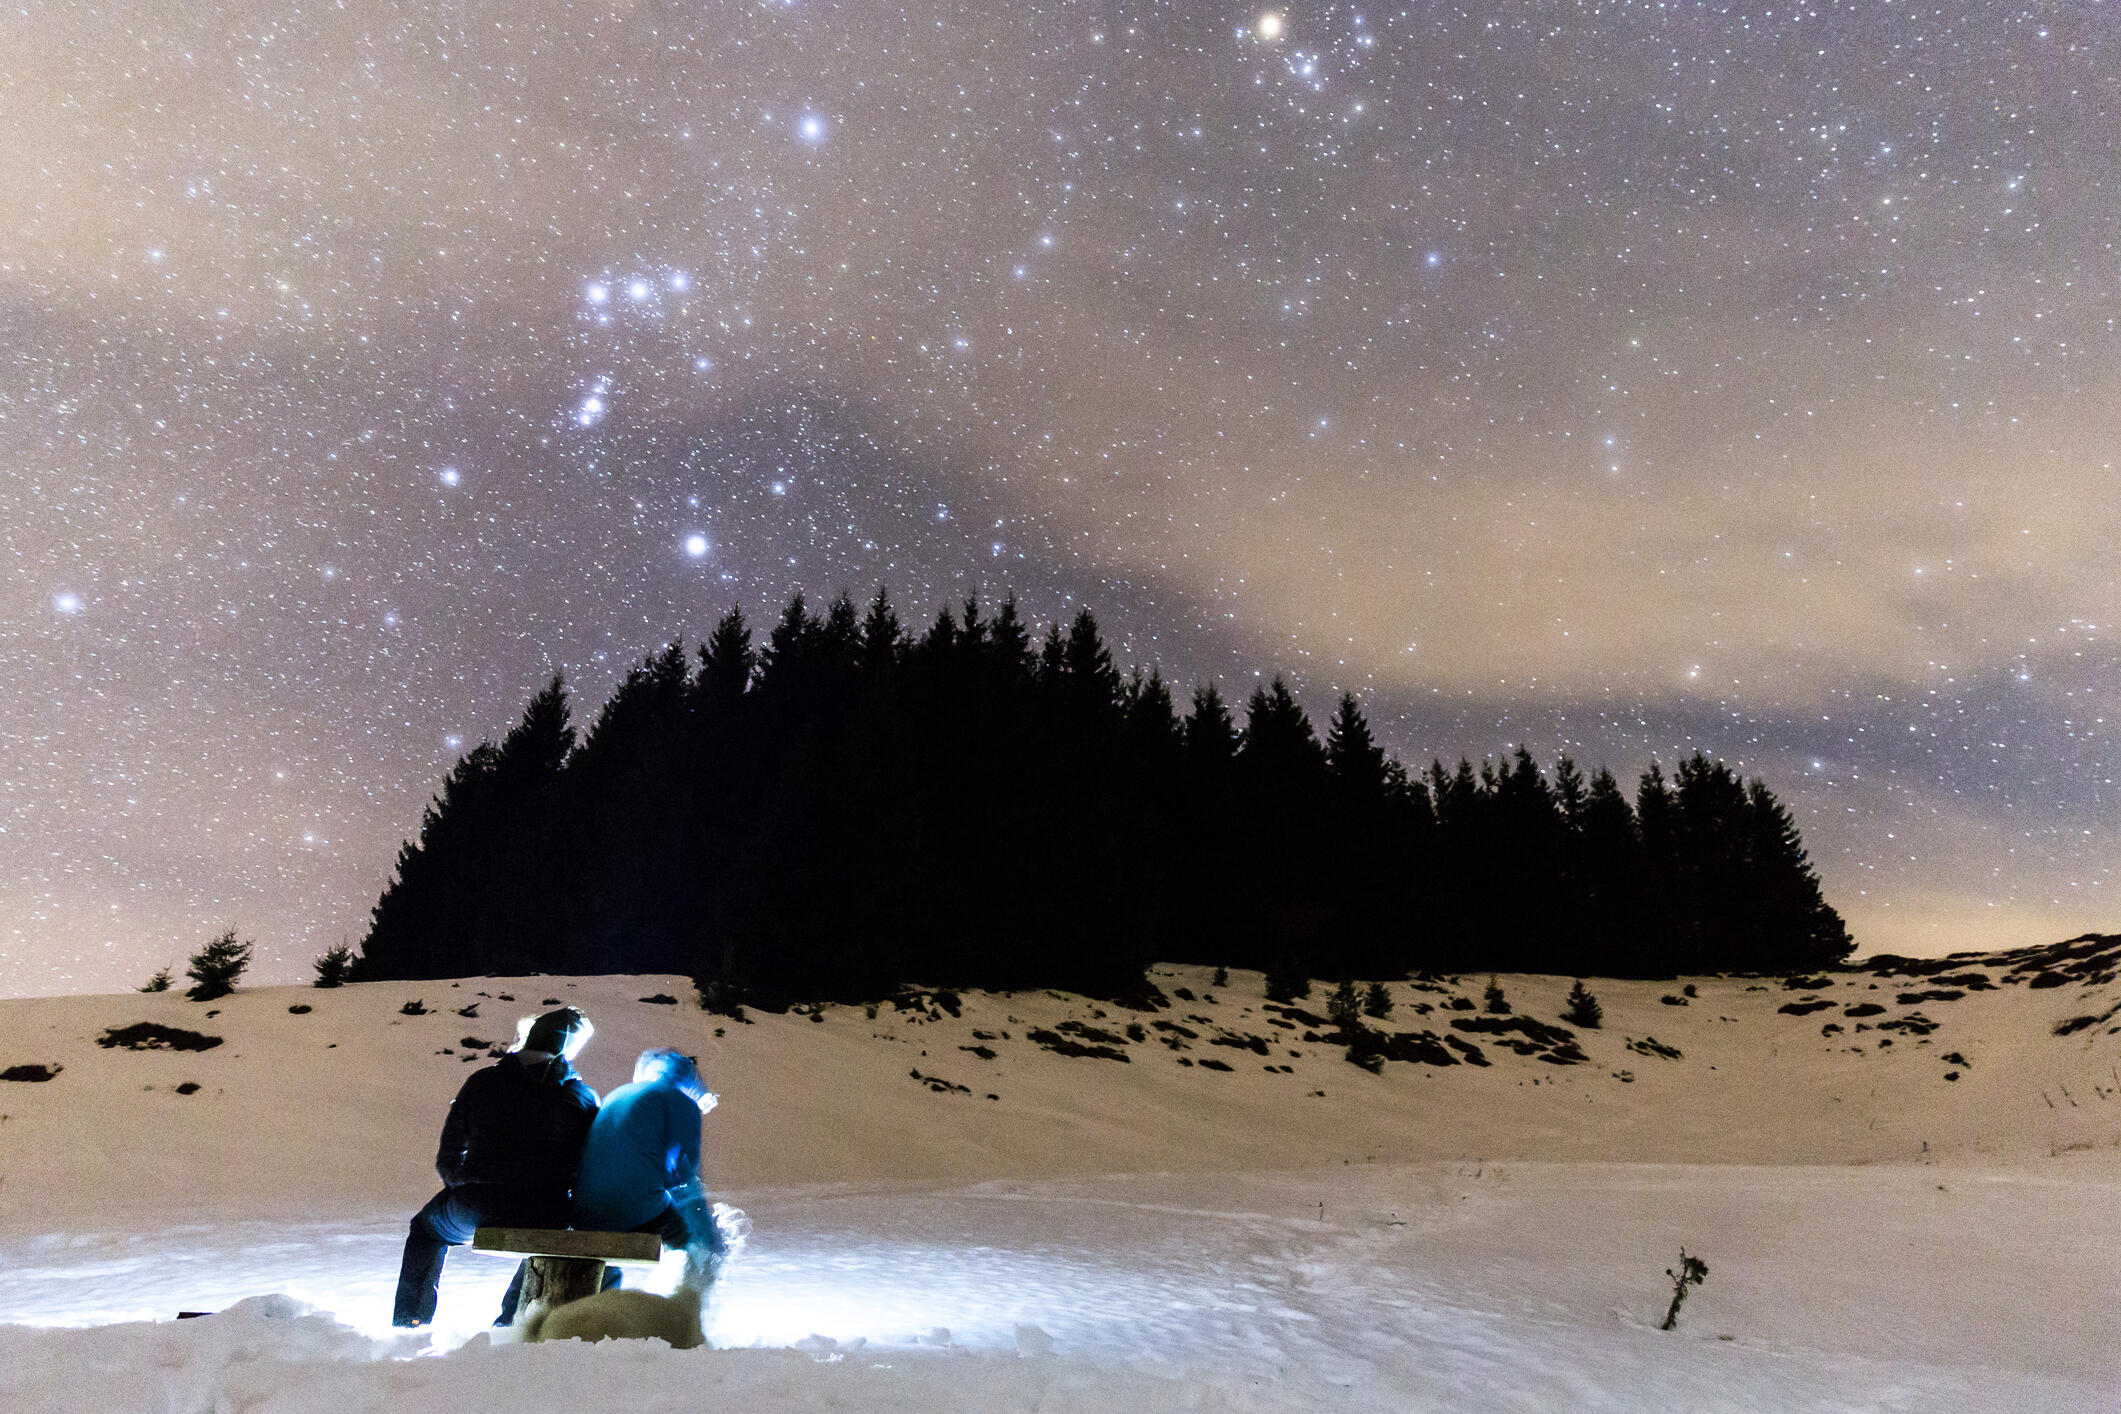 The Milky Way over the winter mountain landscape with pine trees. Two people sitting in the foreground watching the falling stars.